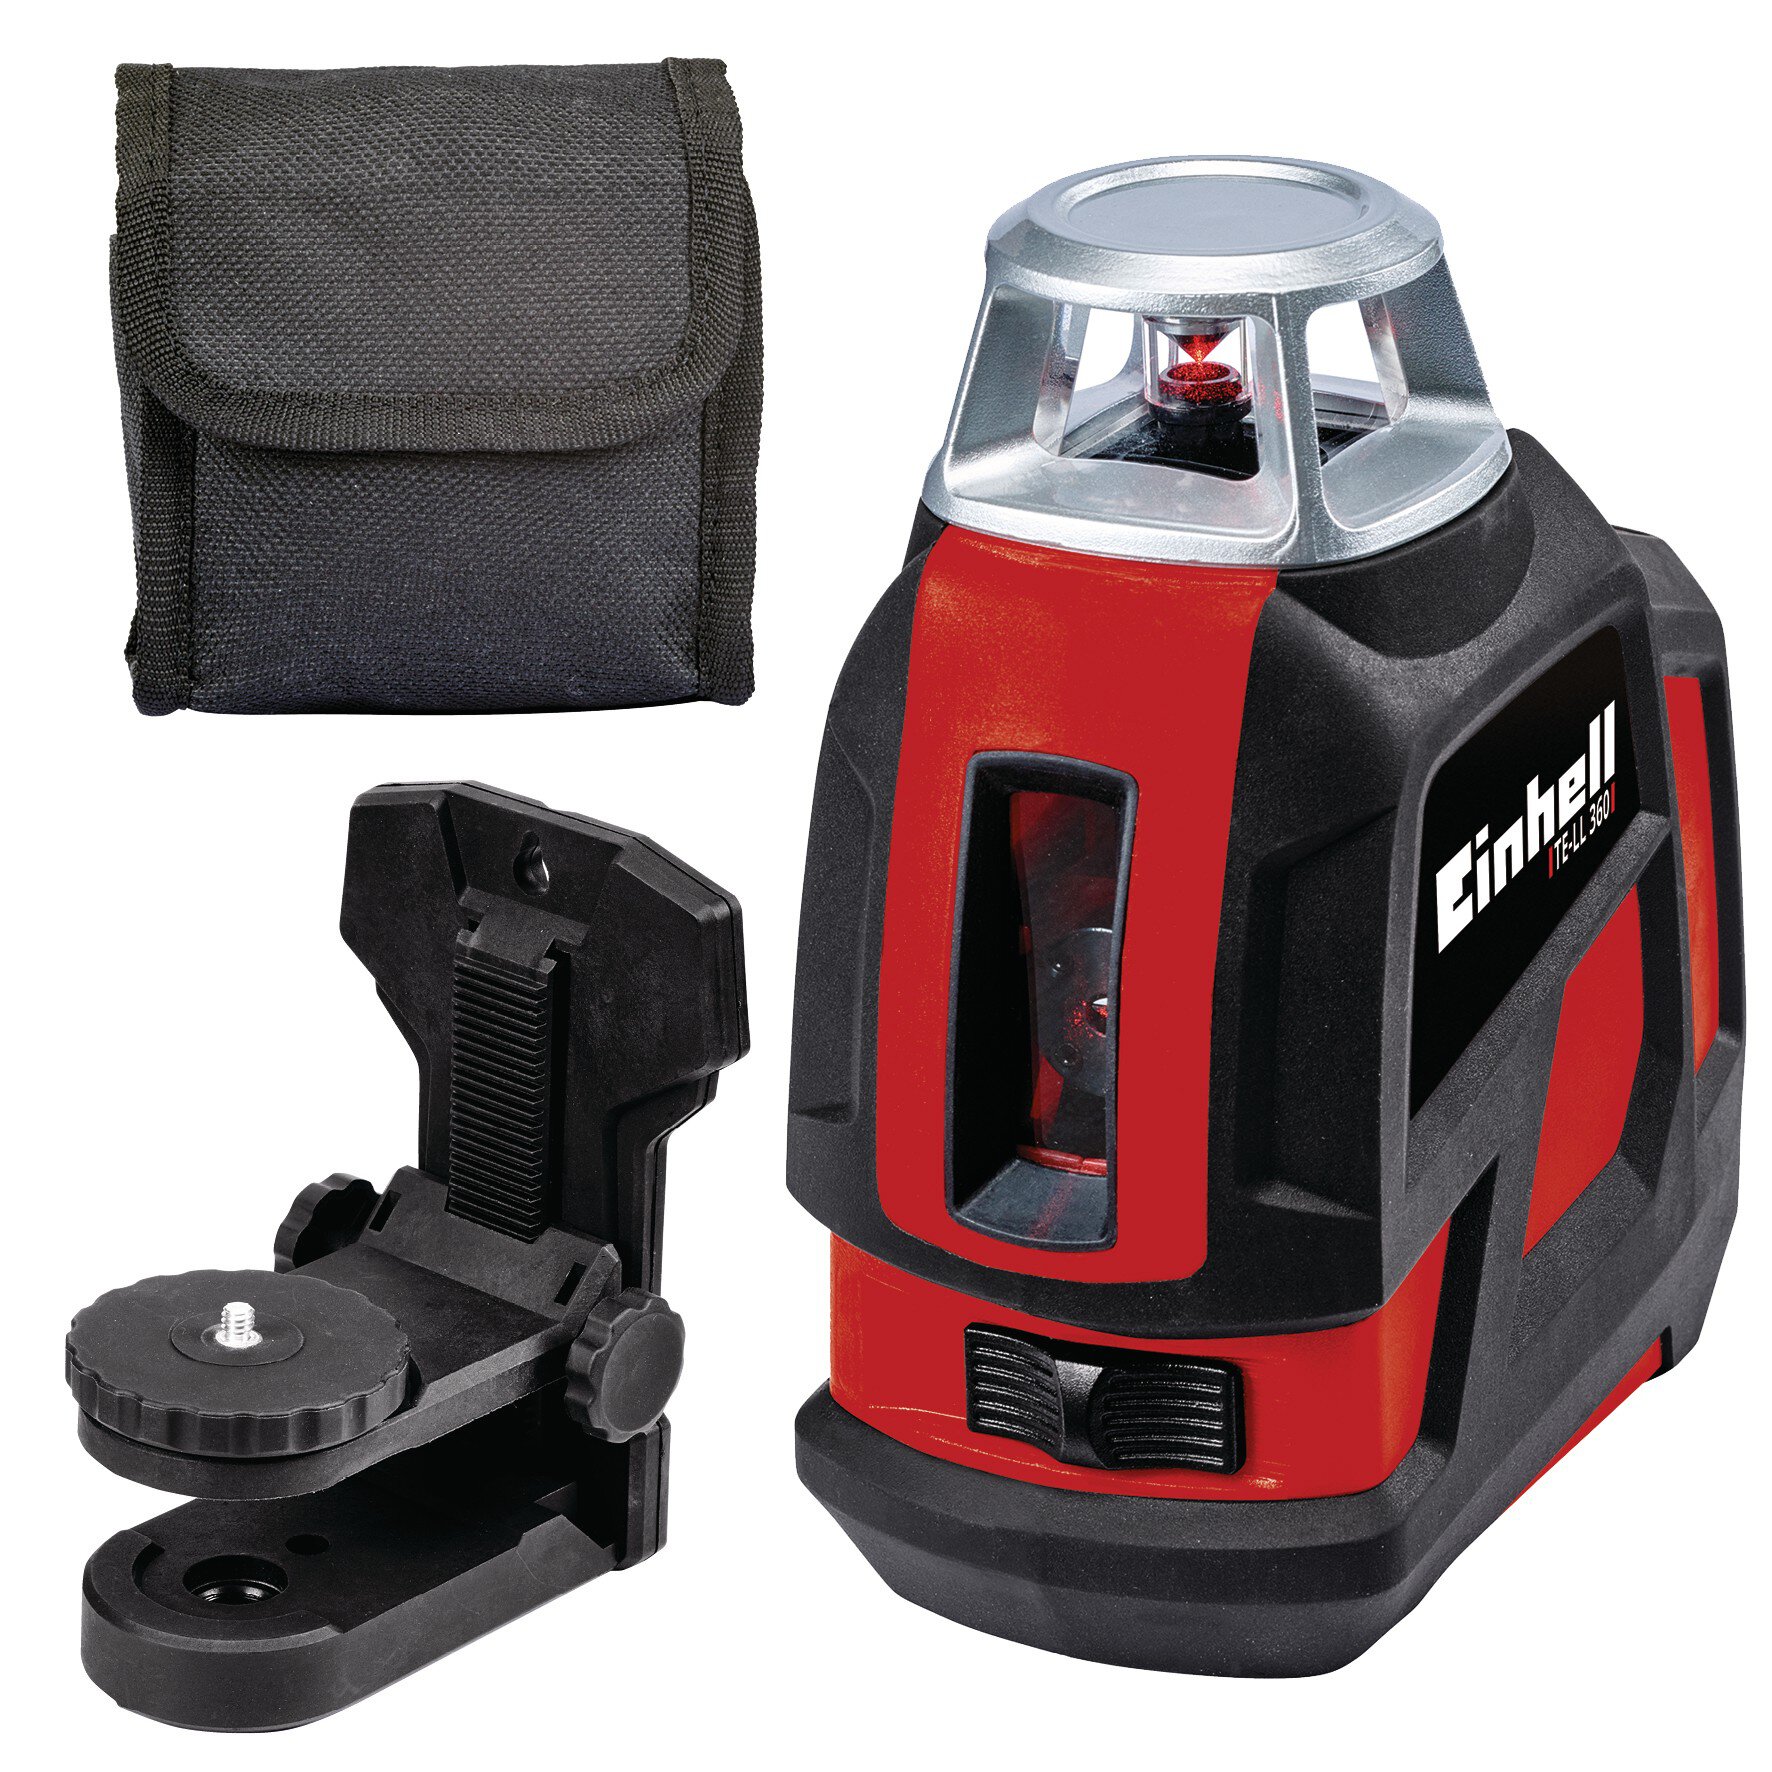 einhell-expert-cross-laser-level-2270110-product_contents-101